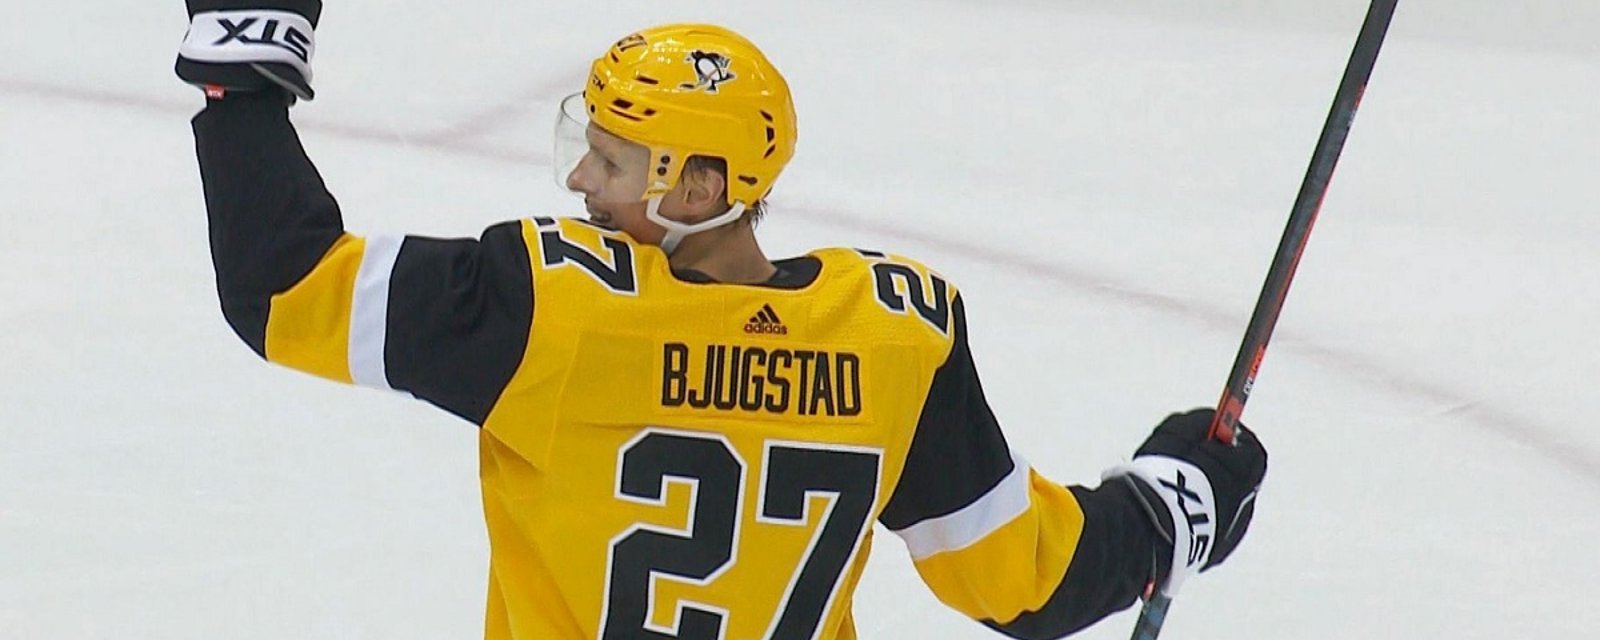 Bjugstad “pumped” about his return home to Minnesota.